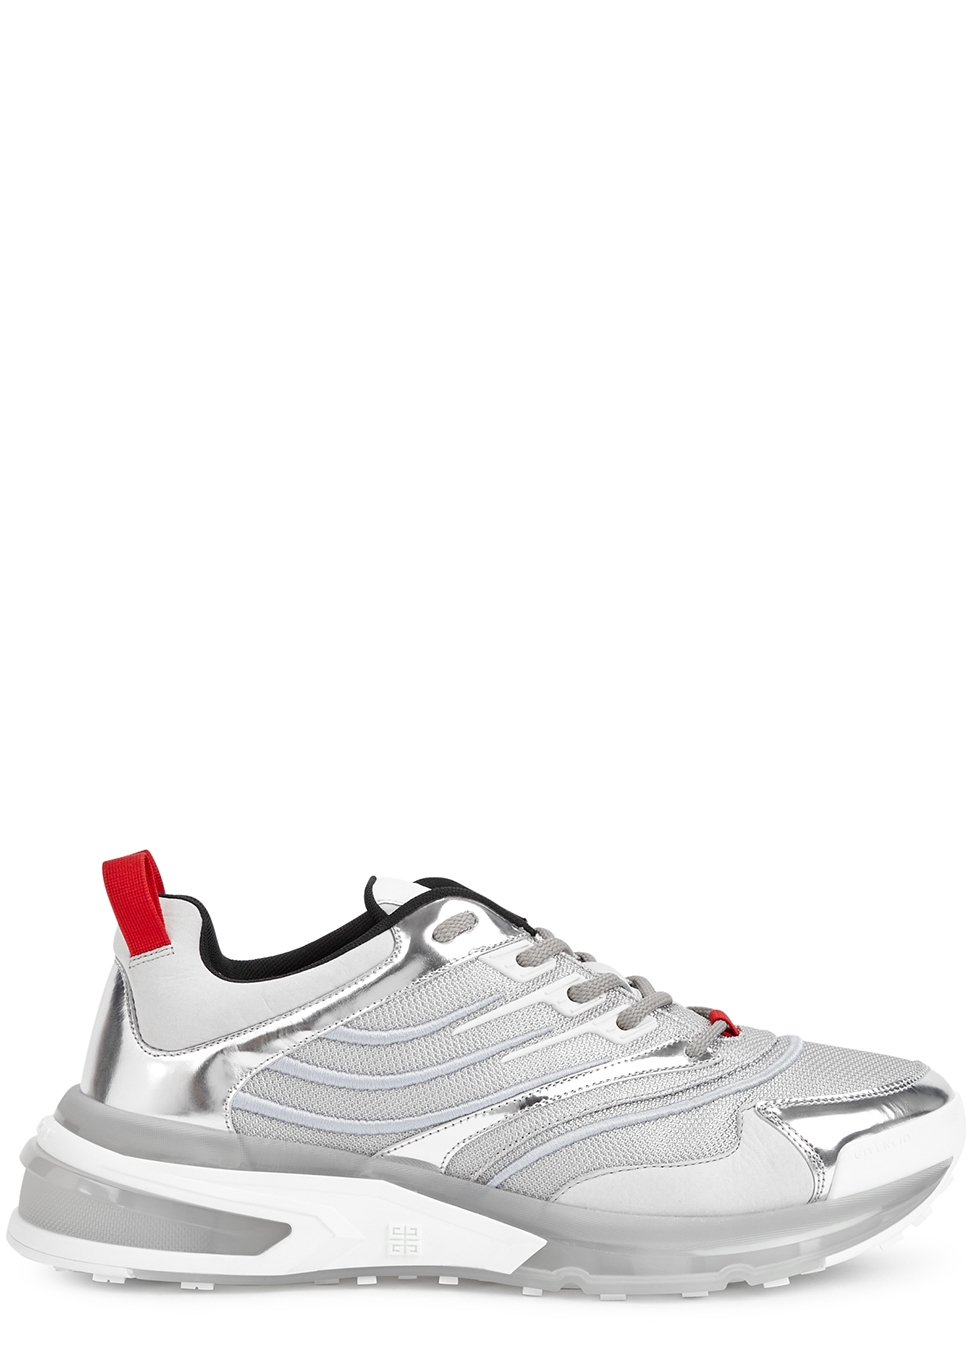 Givenchy Giv 1 silver panelled sneakers 